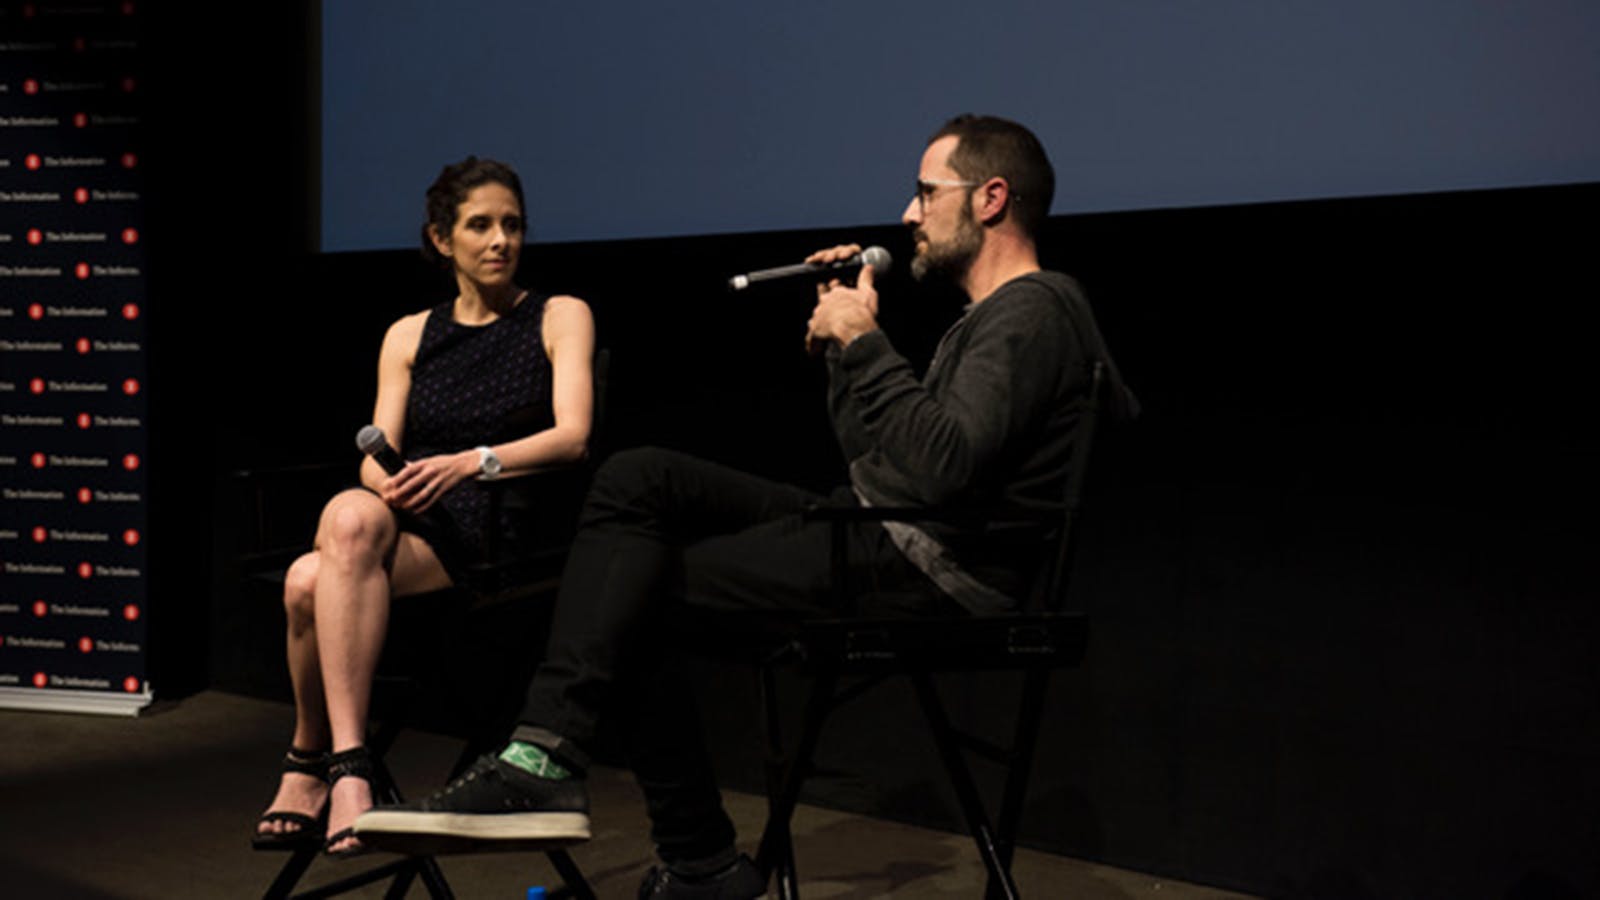 Jessica Lessin interviews Twitter co-founder Ev Williams at The Information’s Silicon Valley Meets Hollywood event in Los Angeles. Photo: Angie Silvy